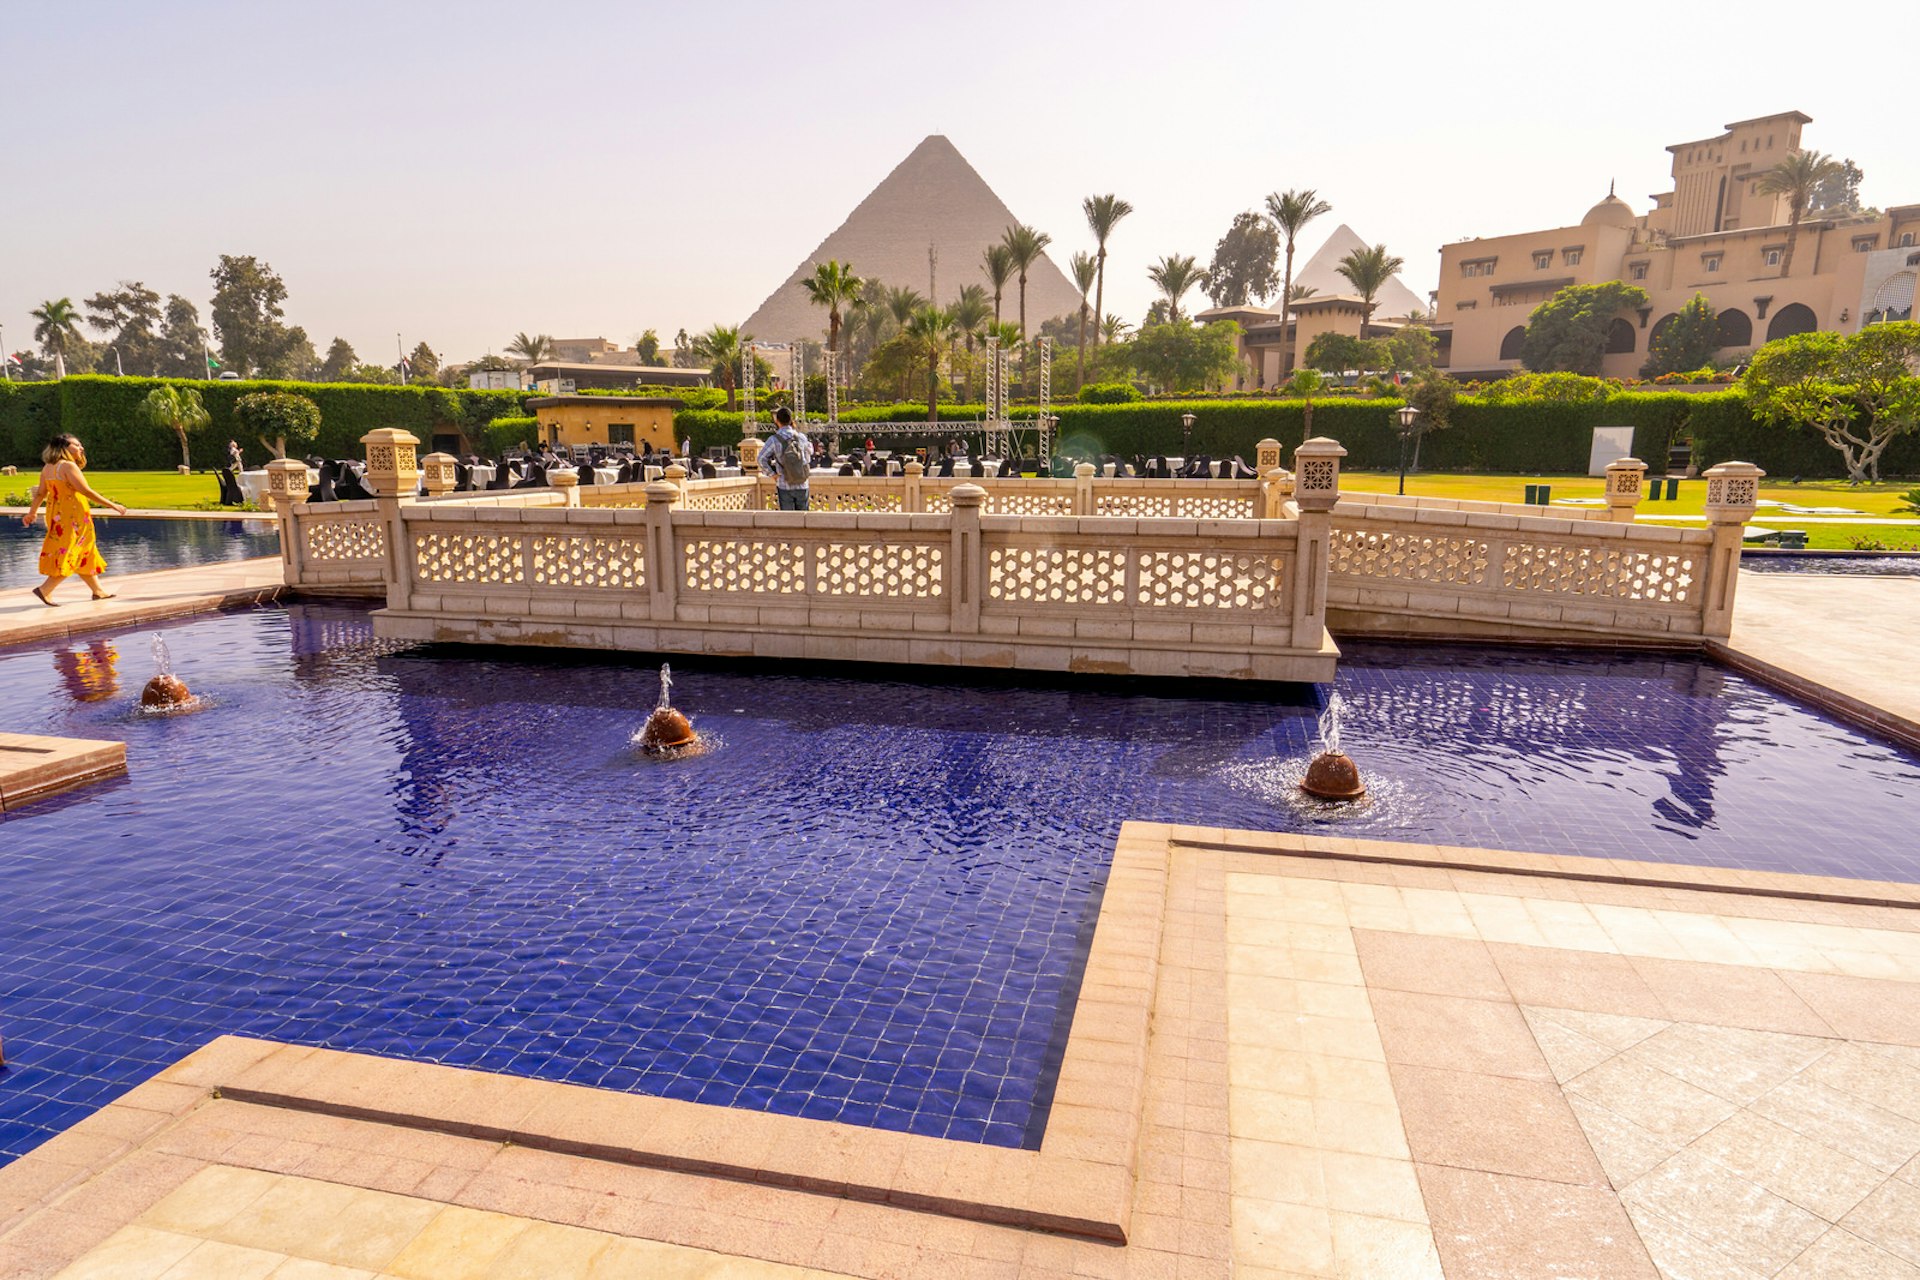 Swimming pool with Cheops pyramid in the background. Pyramids of Giza near Cairo, Egypt